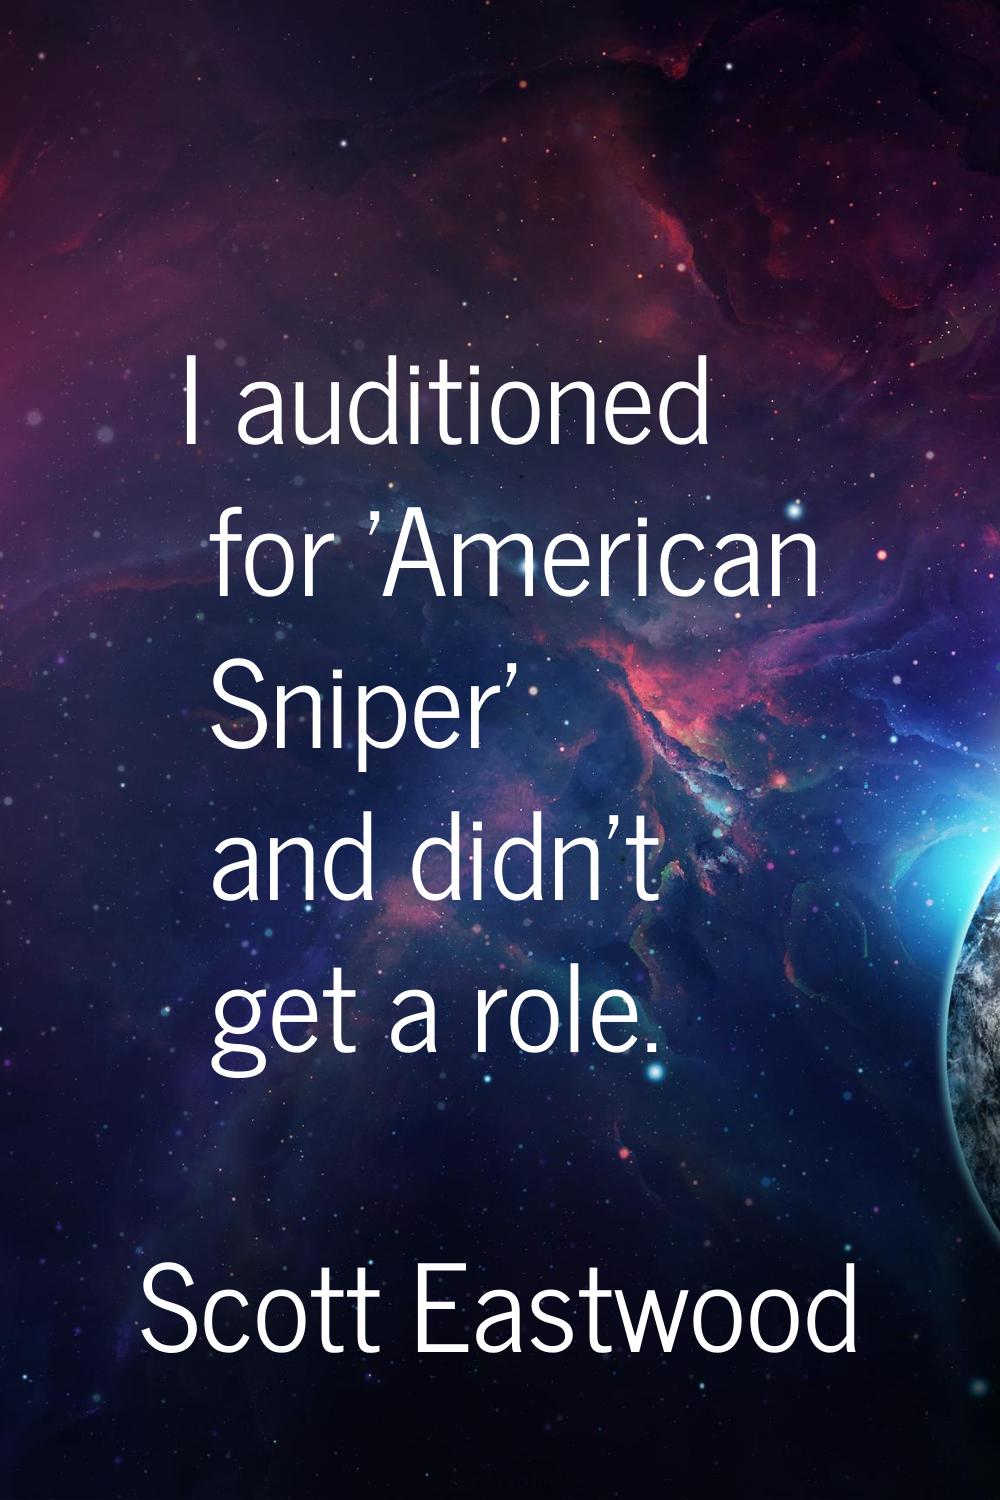 I auditioned for 'American Sniper' and didn't get a role.